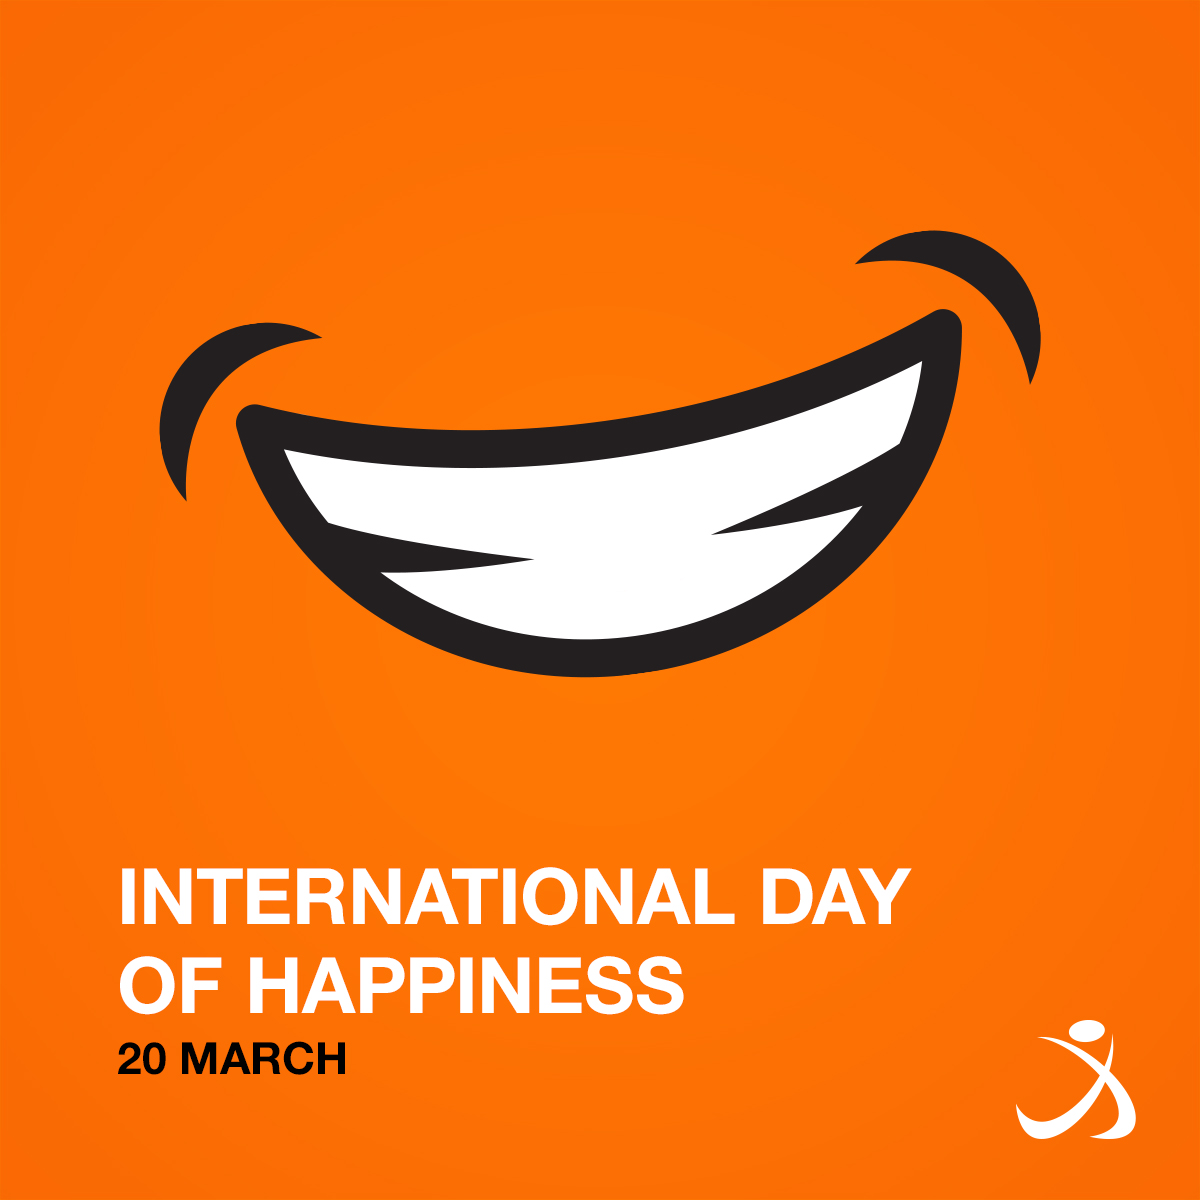 🎉 Get ready to spread smiles and share the joy! 🌟 Let's unite to foster a culture of happiness transcending borders and cultures this International Day of Happiness. Share what makes you happy and experiences as we strive to create a happier work environment for everyone. 💼